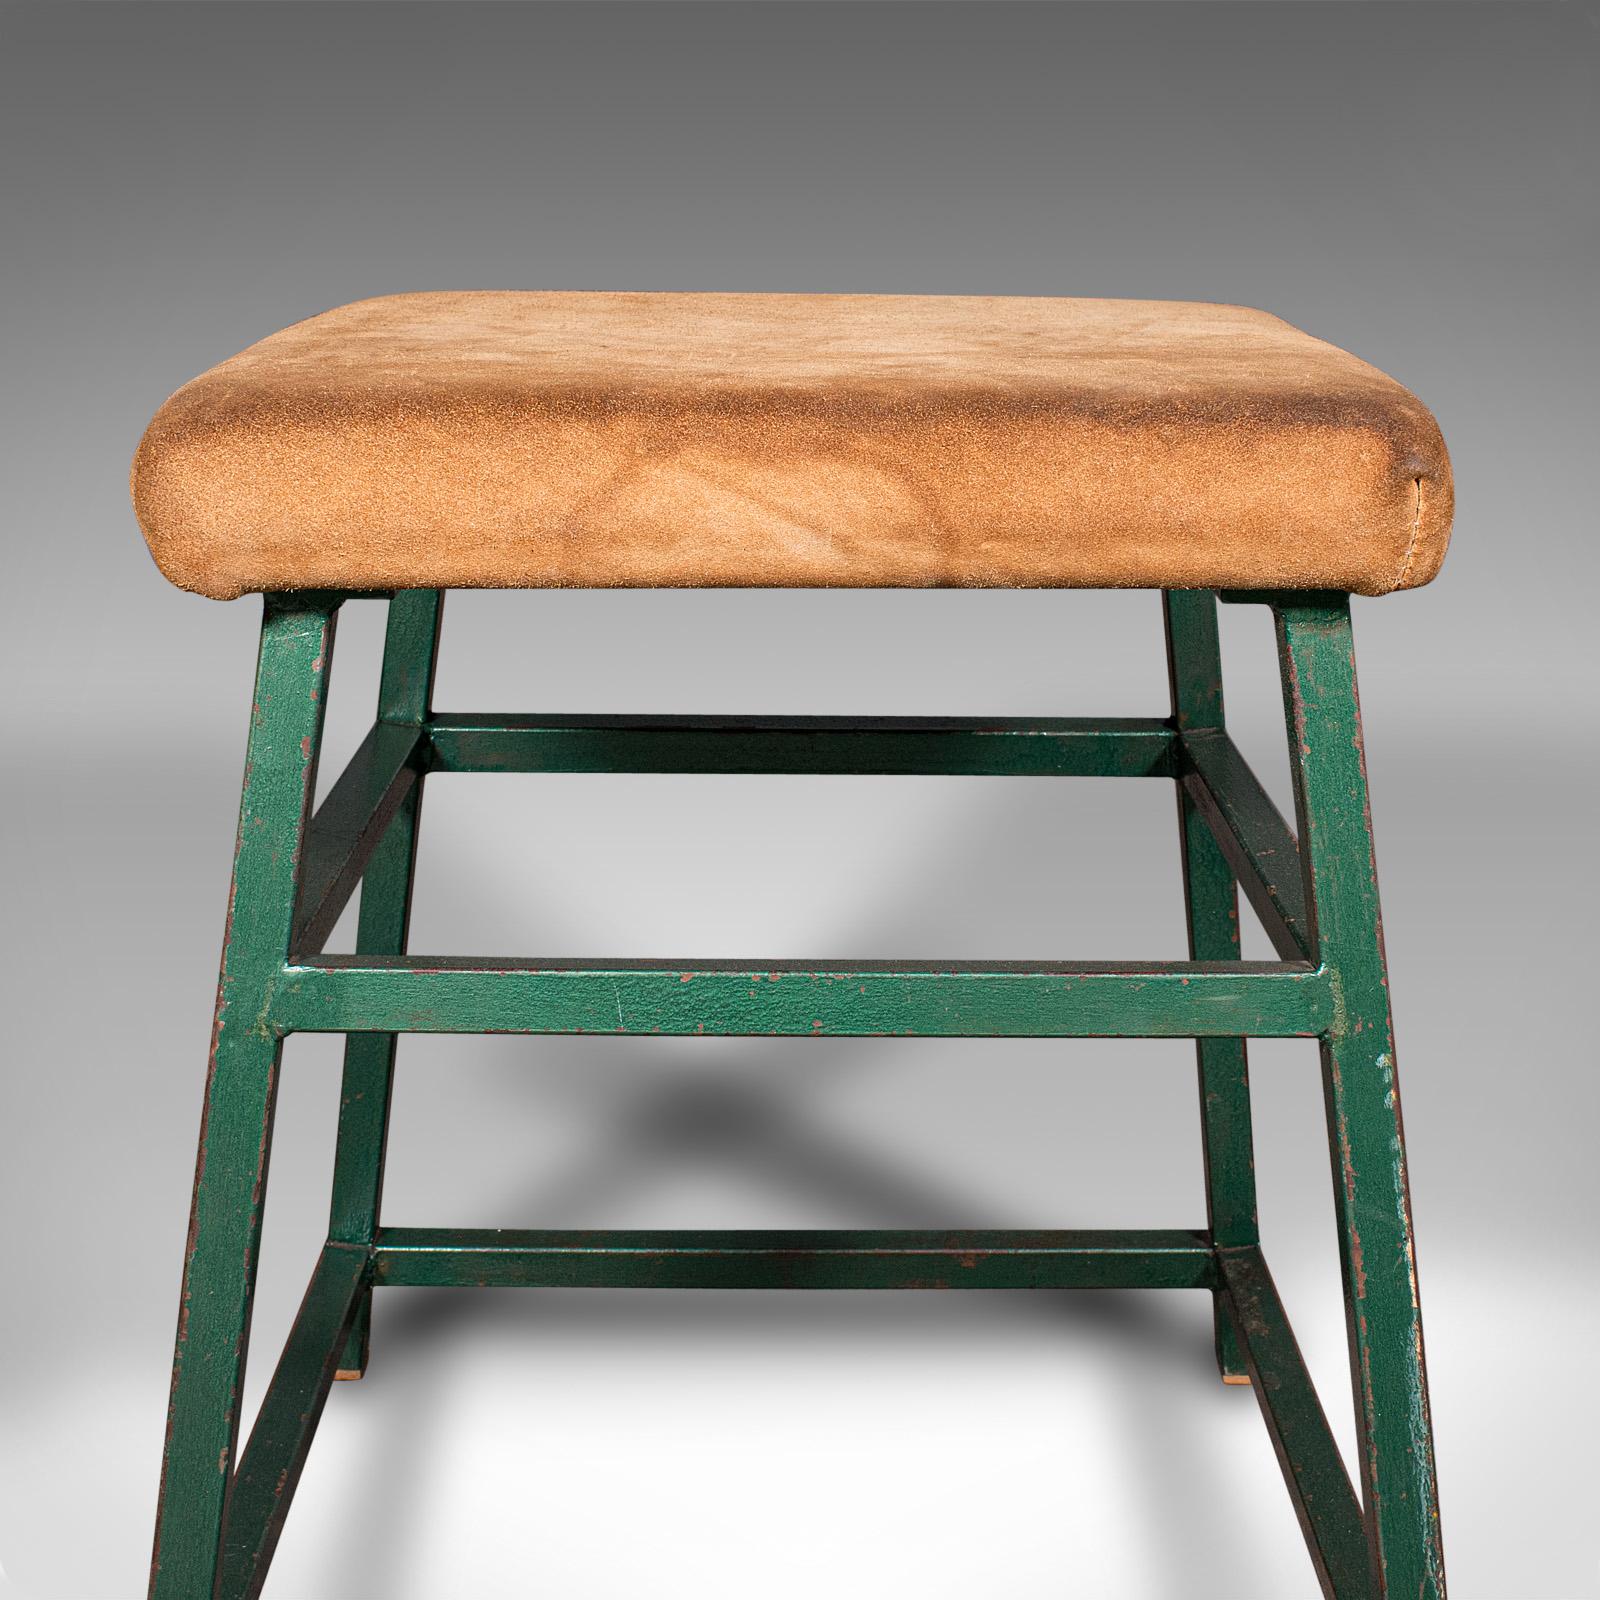 Large Vintage Industrial Lab Stool, English, Suede, Kitchen, Office Seat, C.1950 For Sale 1